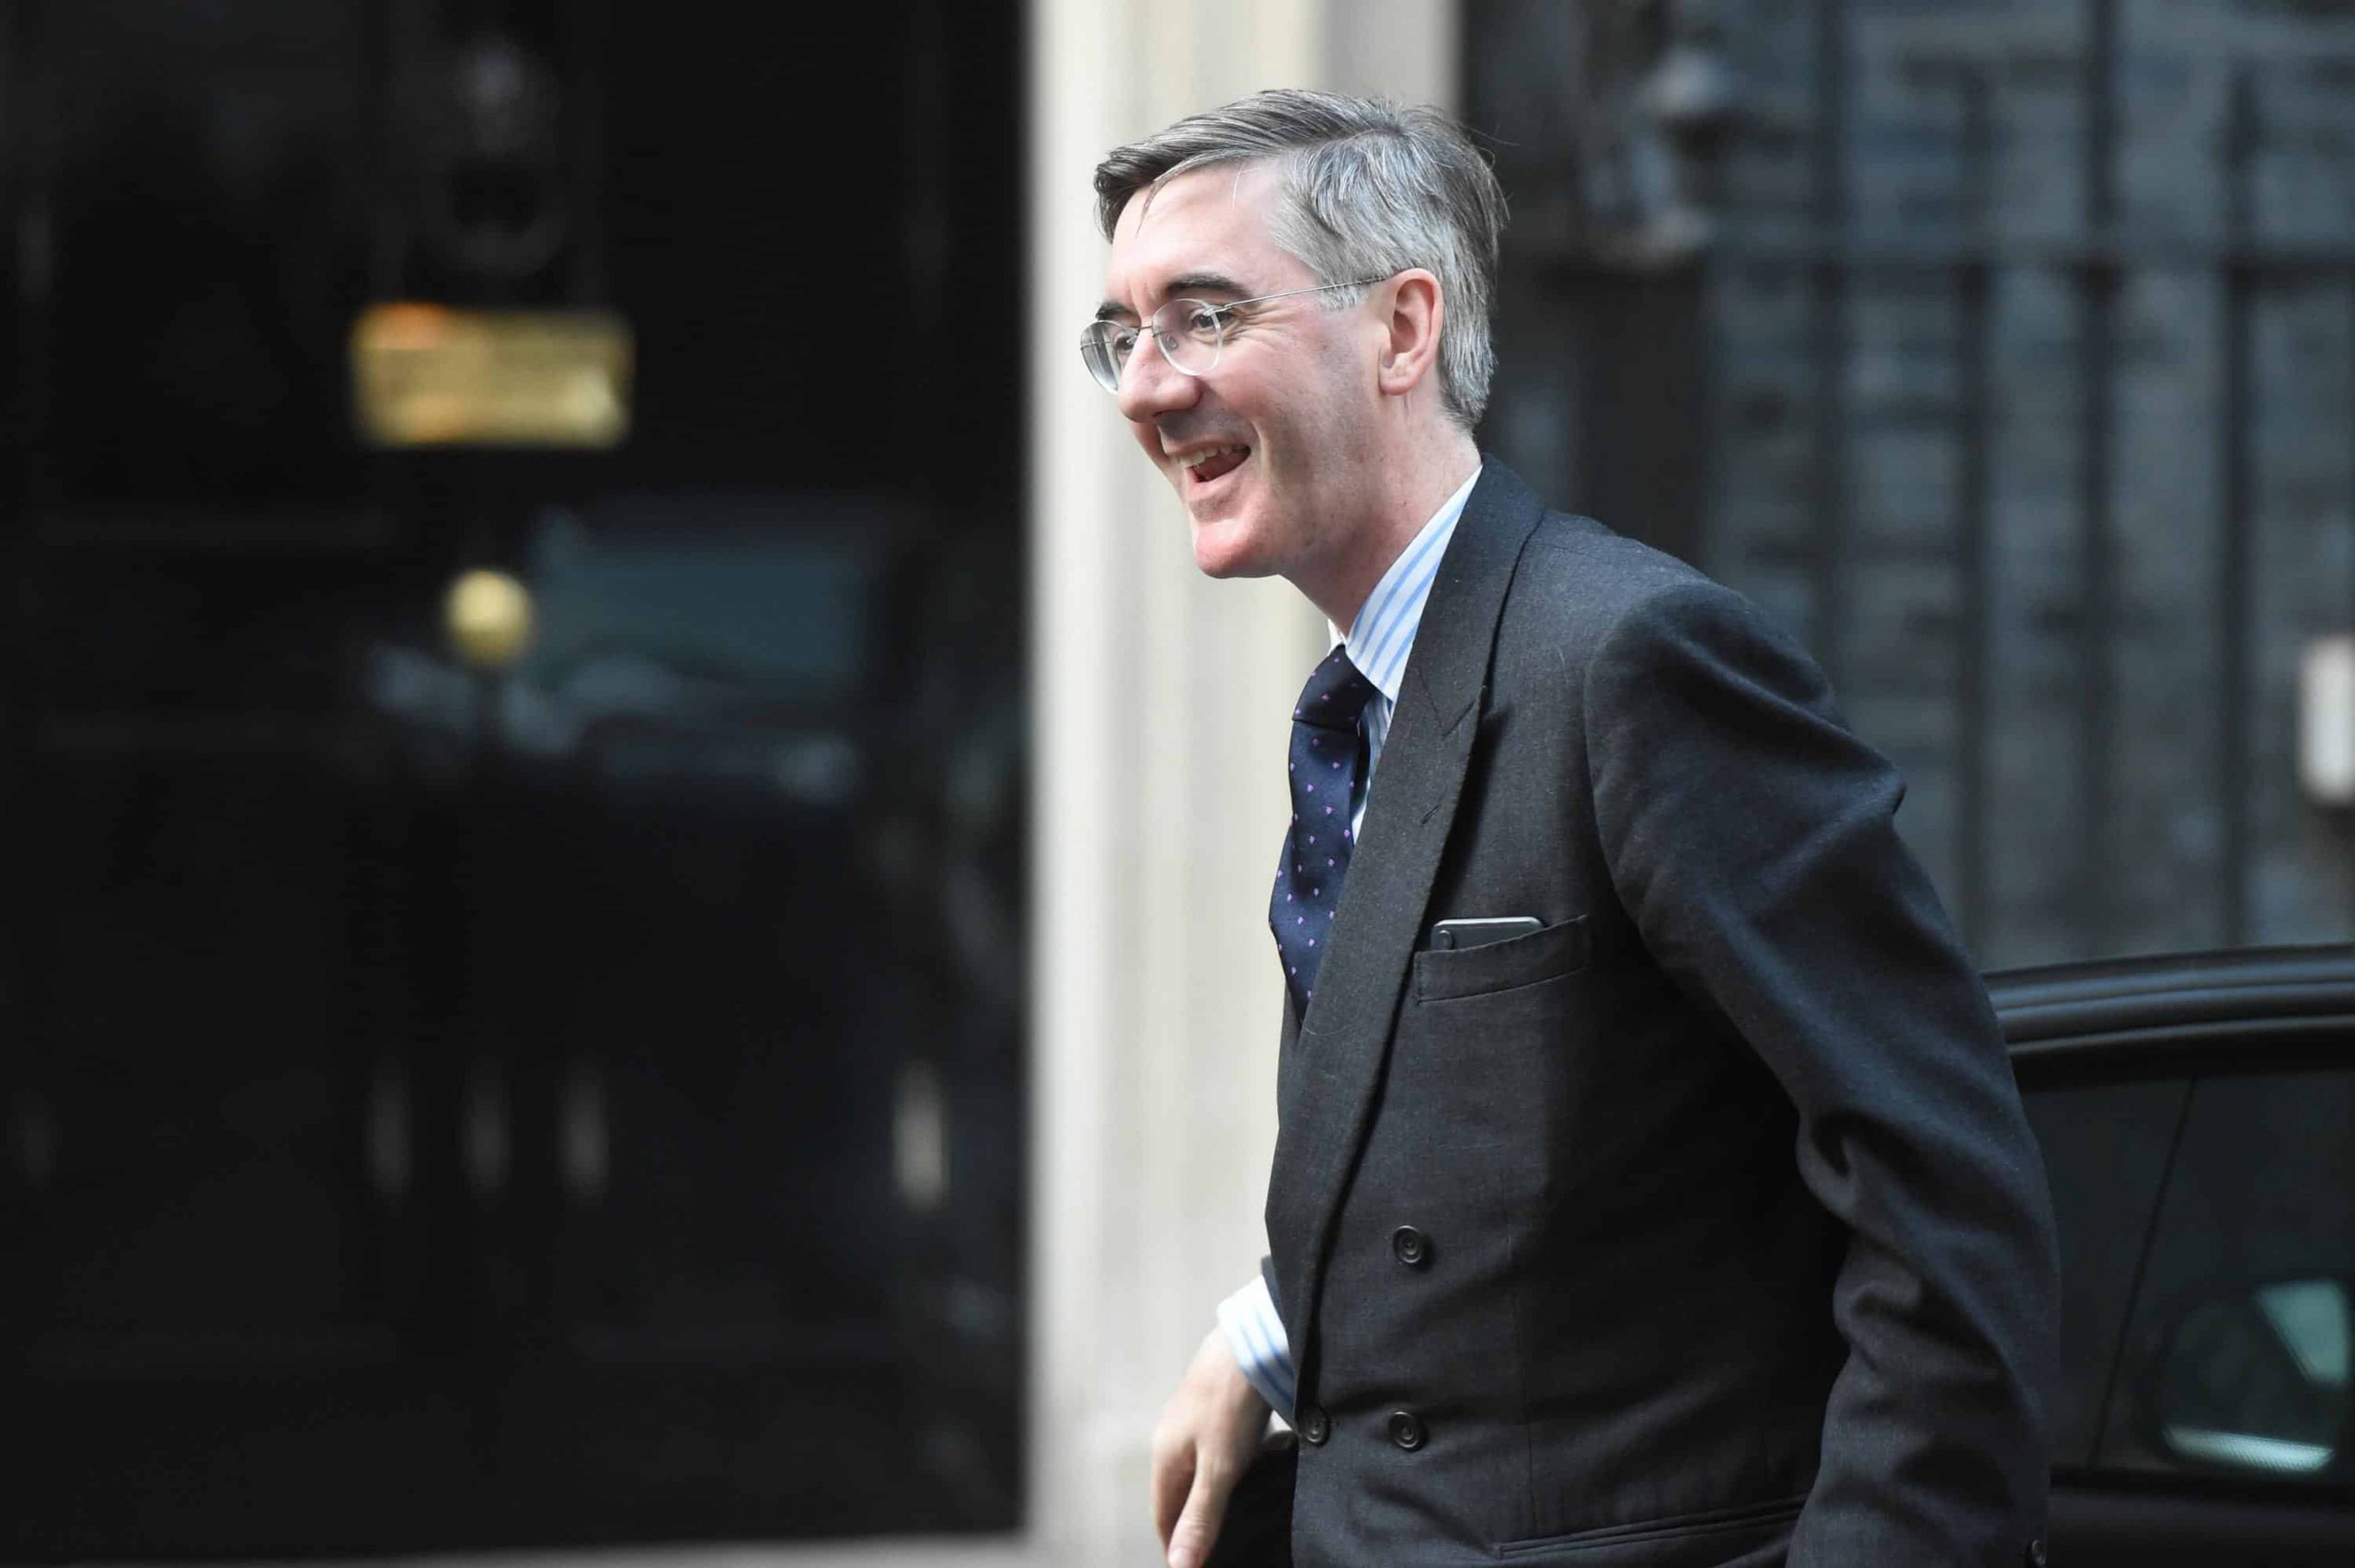 Rees Mogg brands MPs calling for fireworks ban as ‘socialists who have no fun’